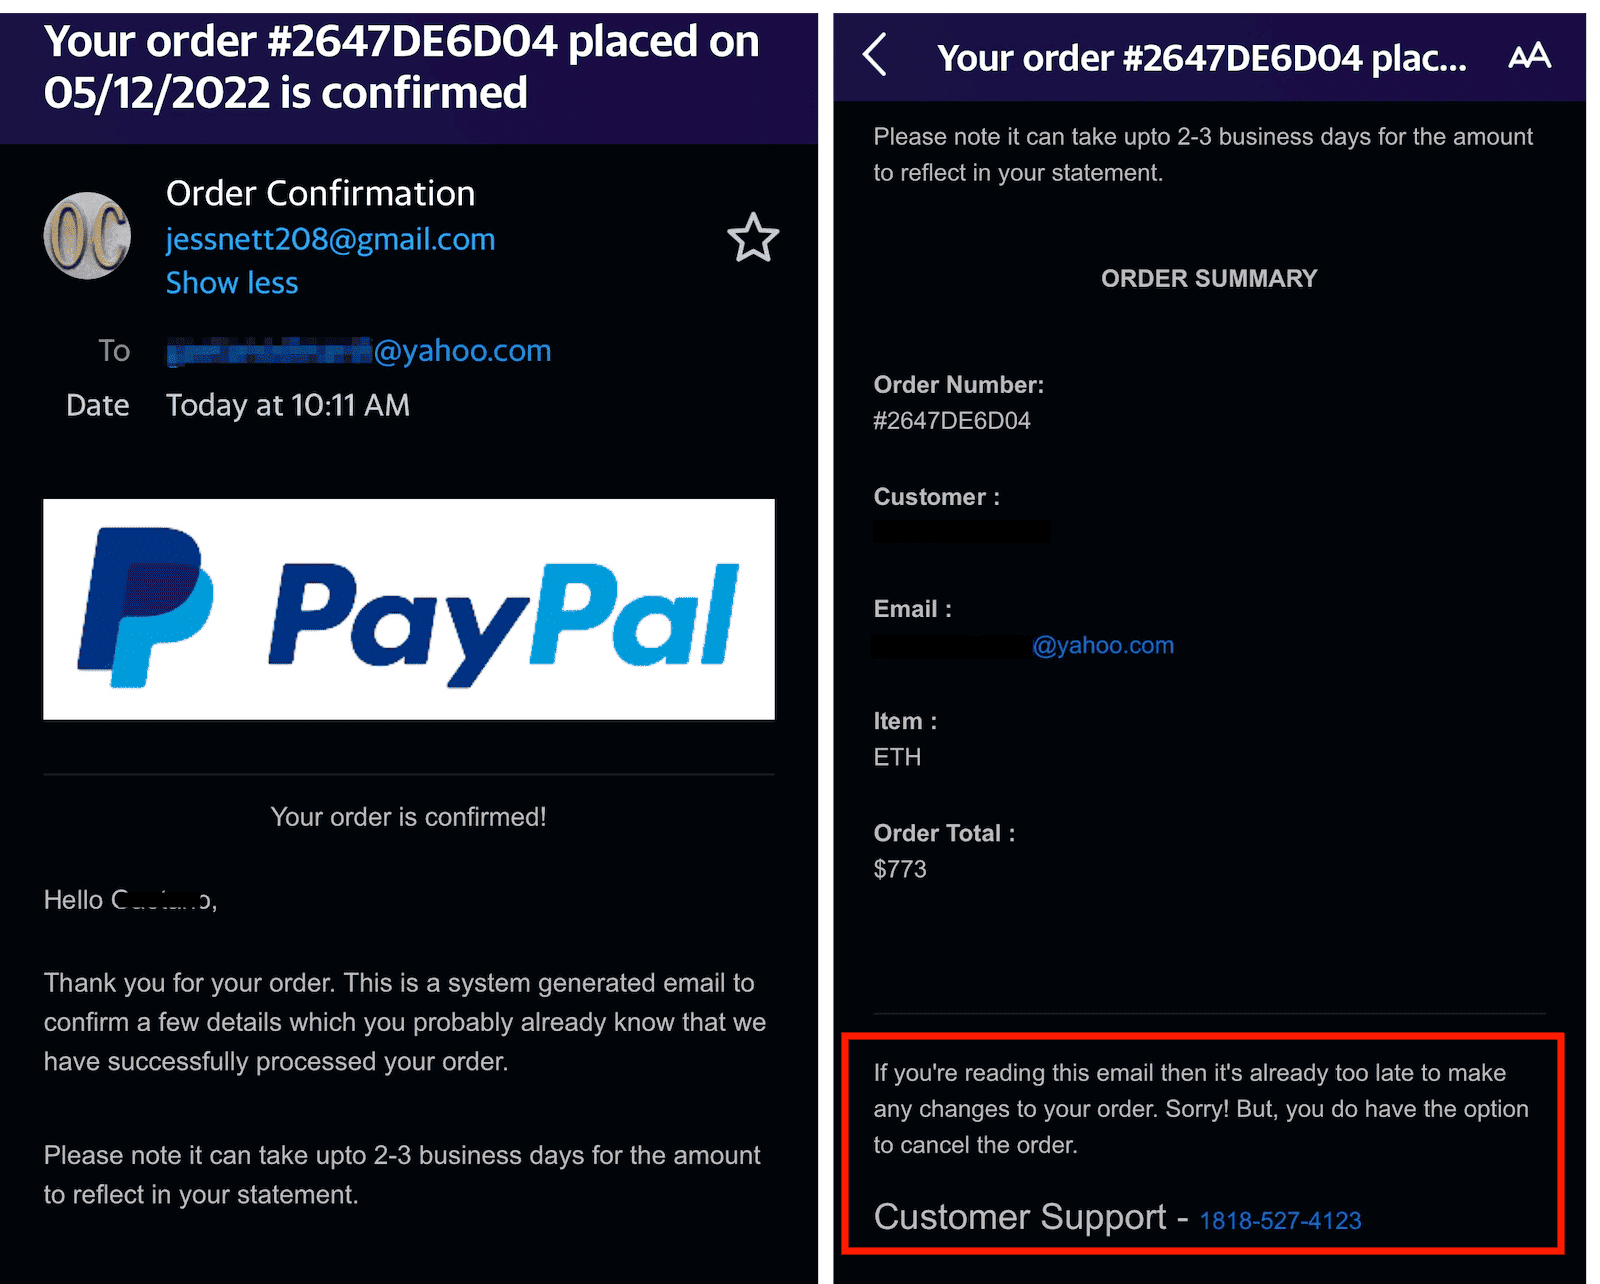 Does PayPal Refund Scam Victims?